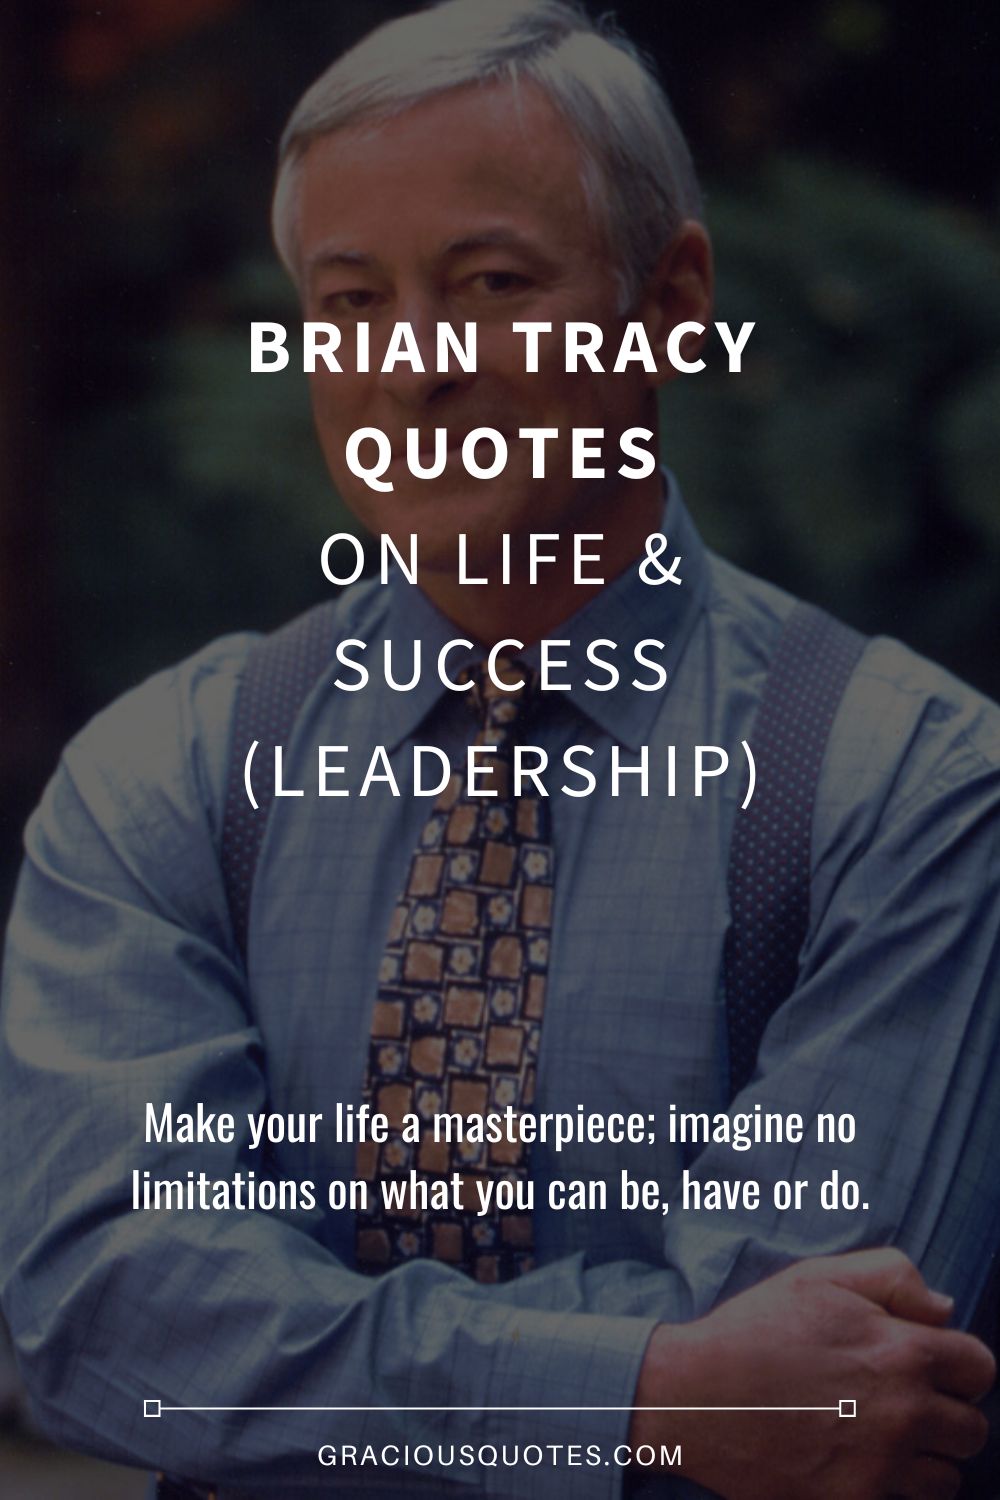 Brian Tracy Quotes on Life & Success (LEADERSHIP) - Gracious Quotes